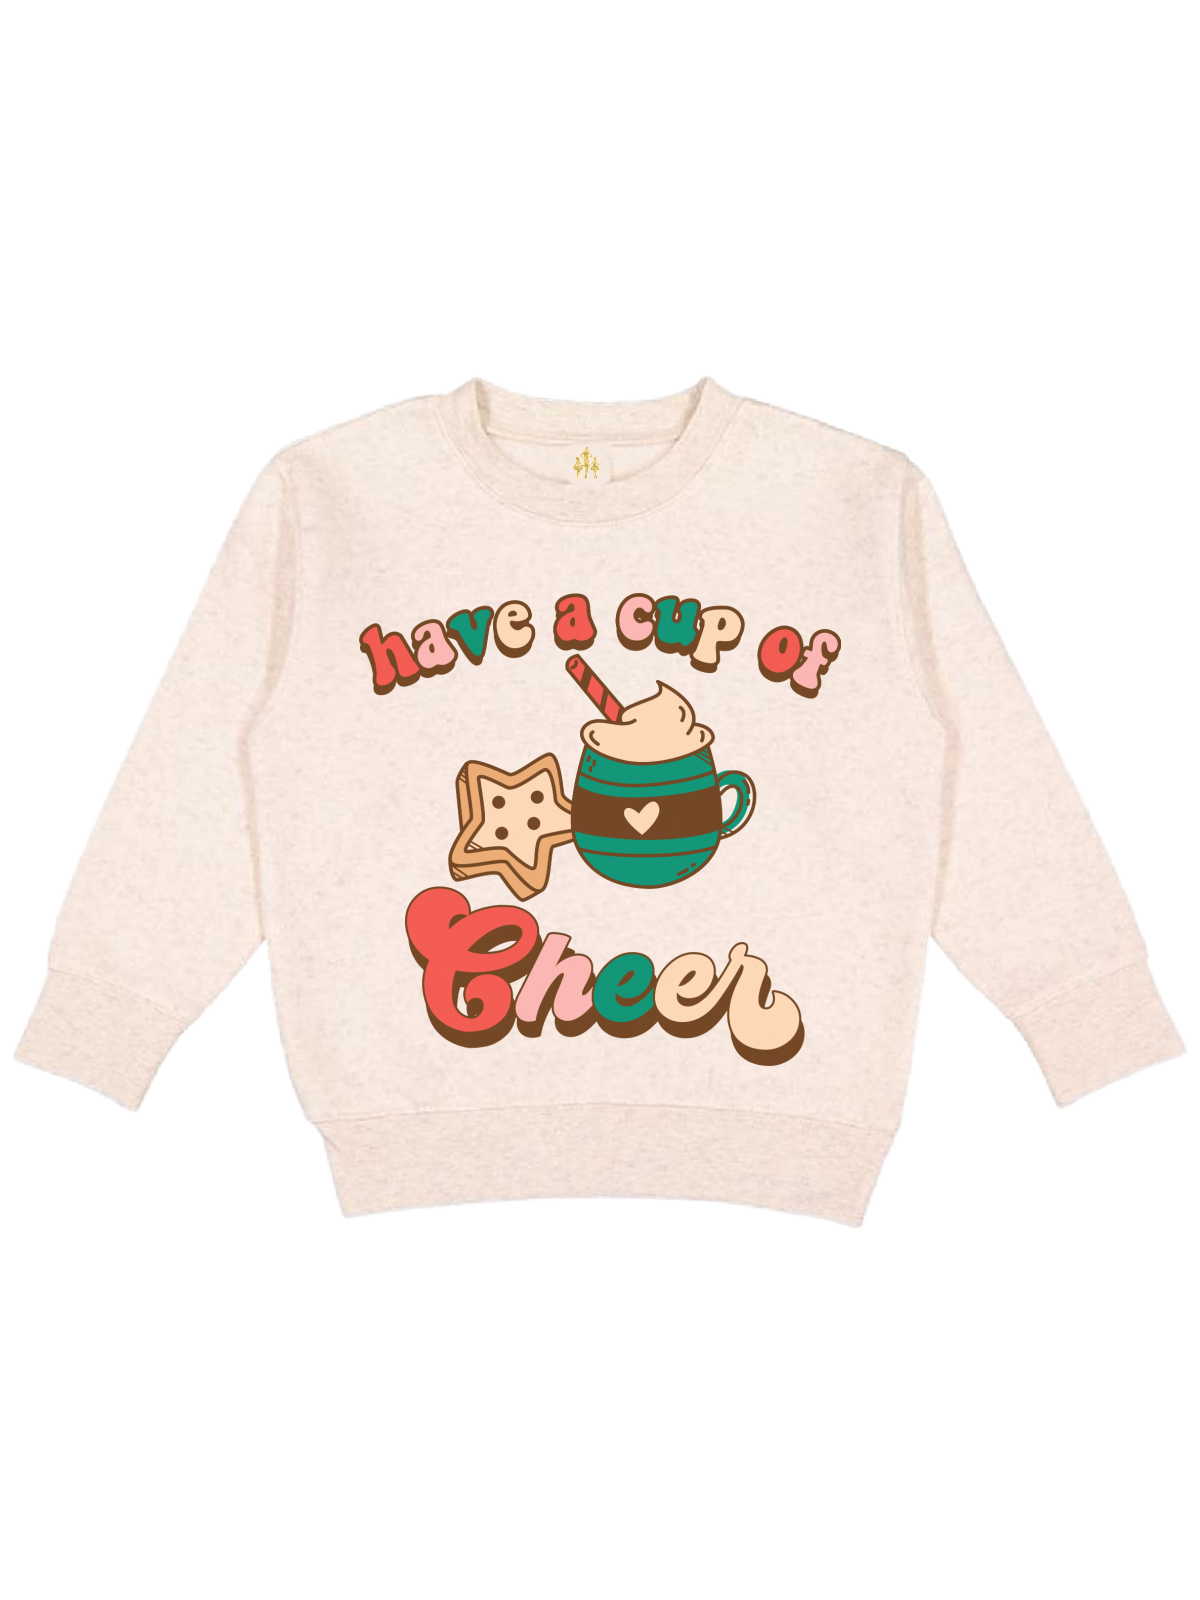 Have a cup of cheer kids retro Christmas sweatshirt